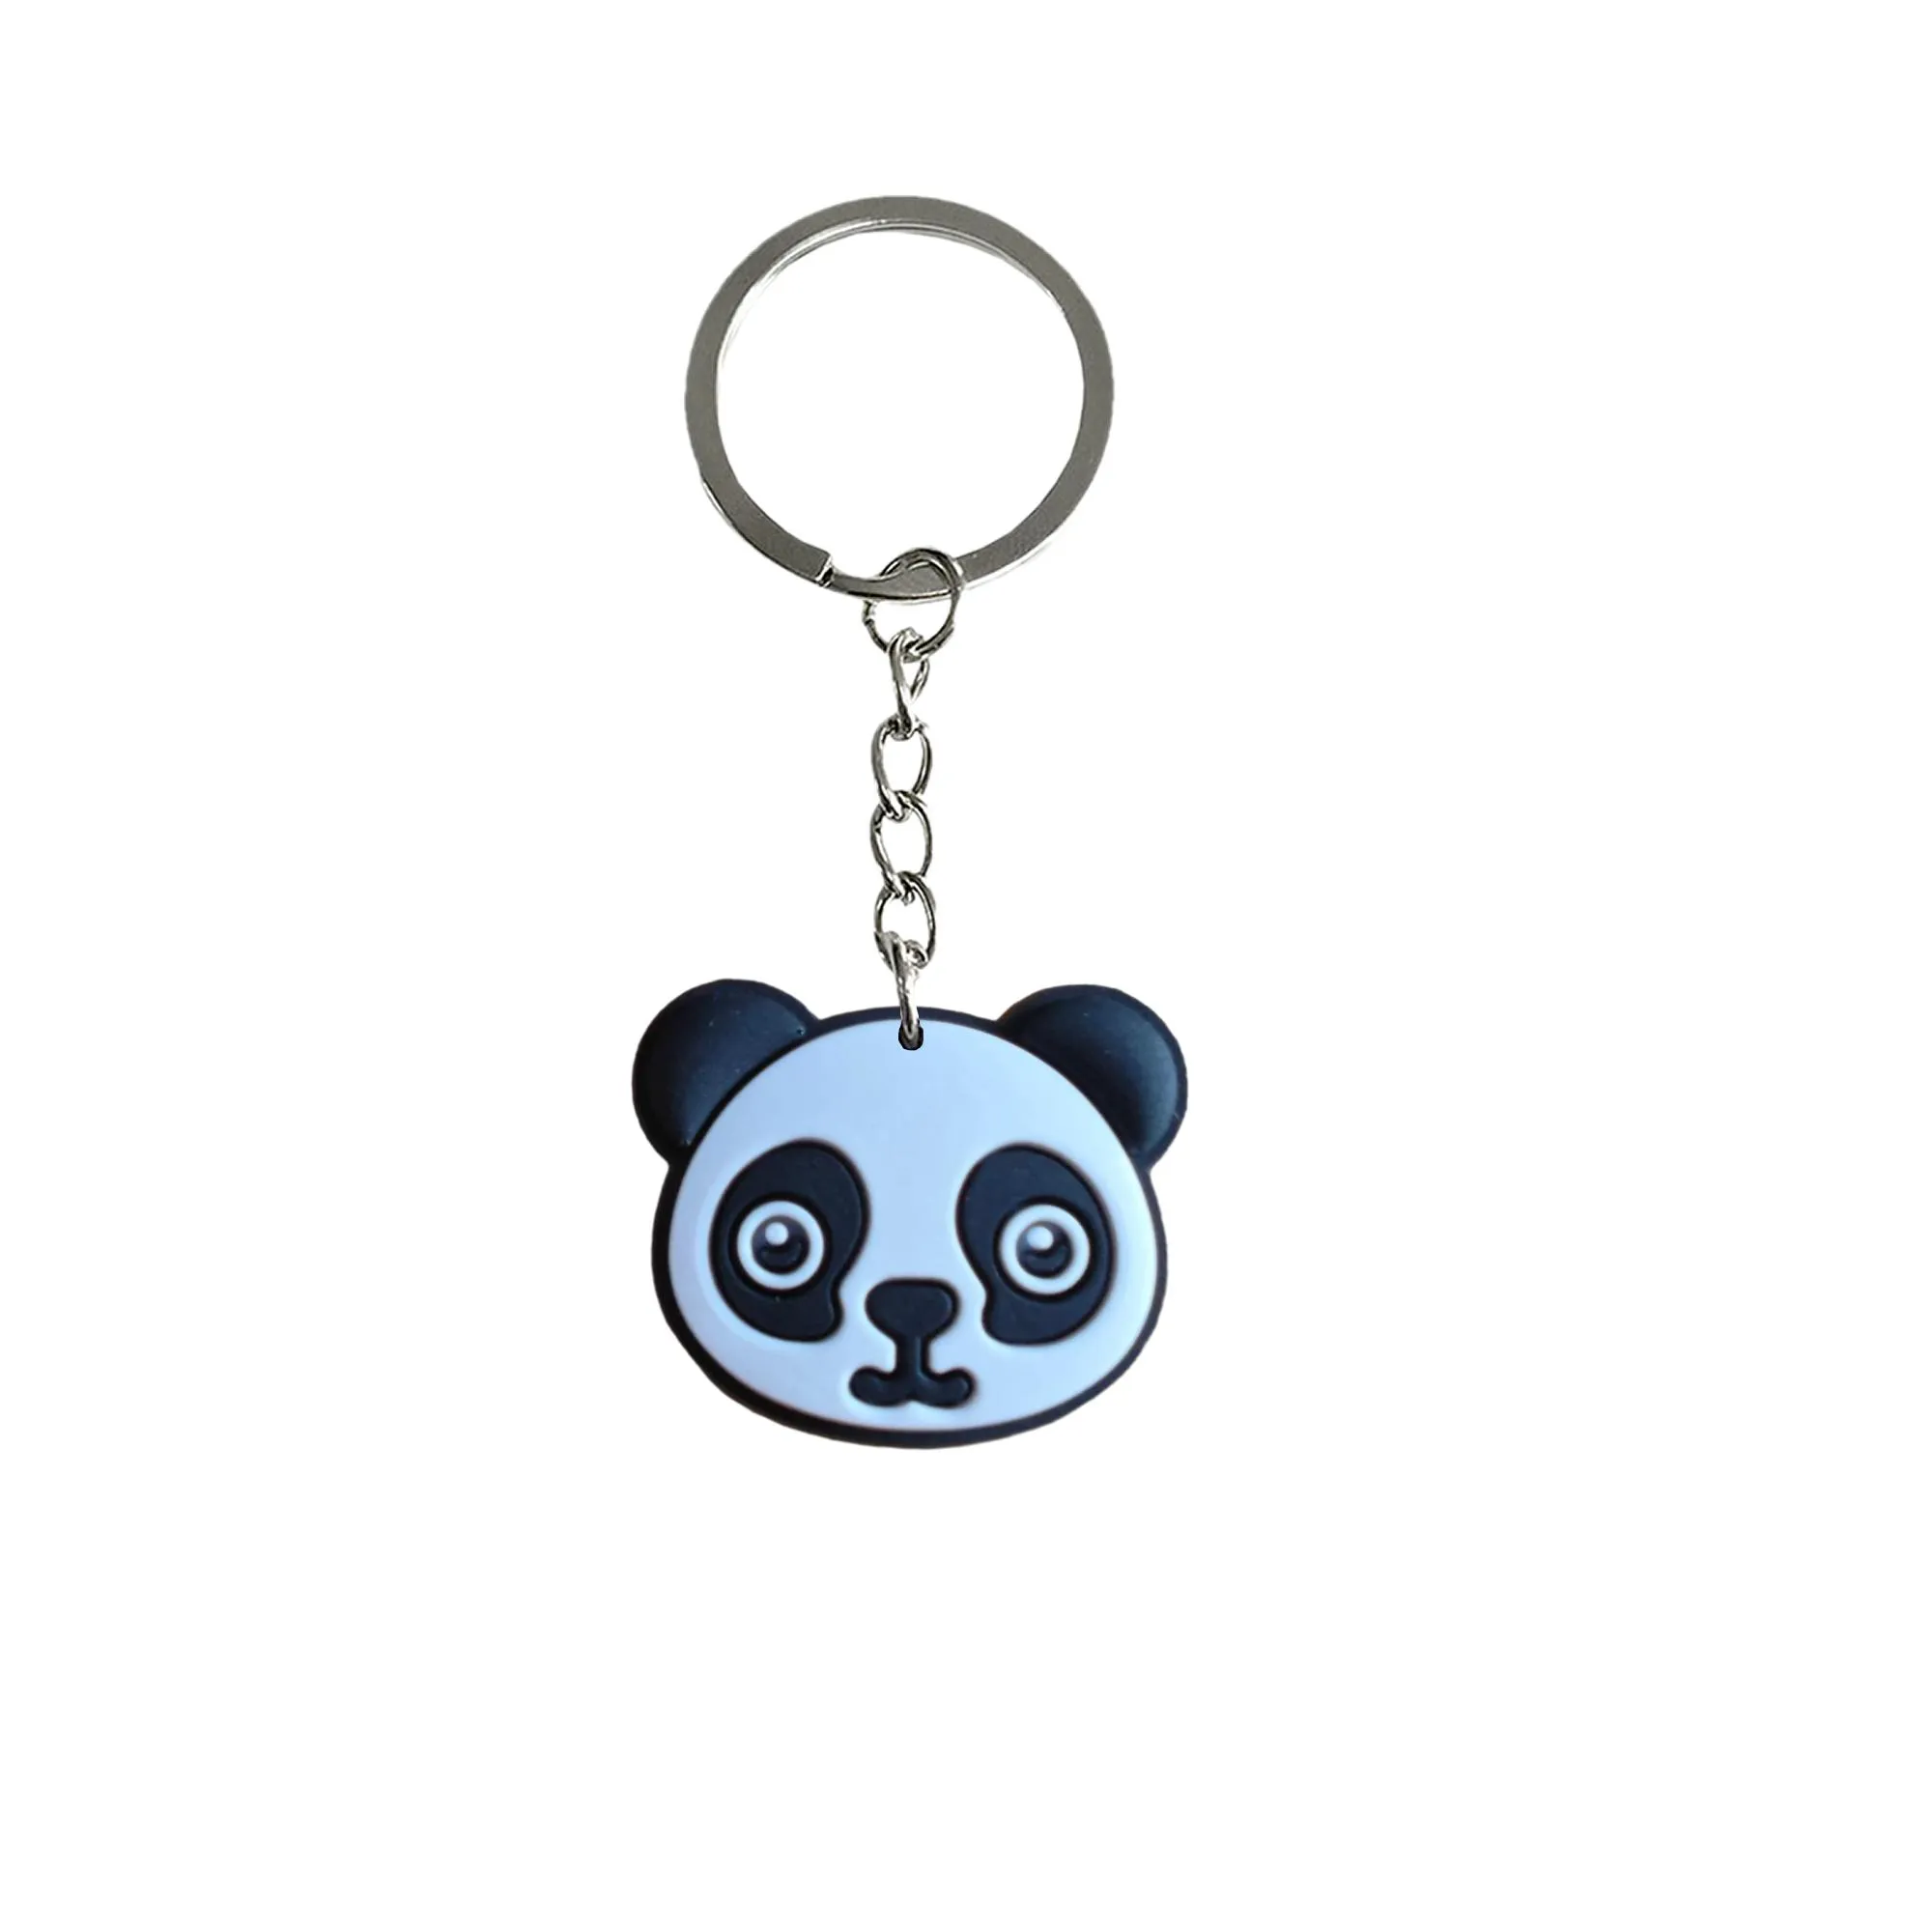 panda 12 keychain car bag keyring for kids party favors backpack shoulder pendant accessories charm suitable schoolbag key rings tags goodie stuffer christmas gifts bags